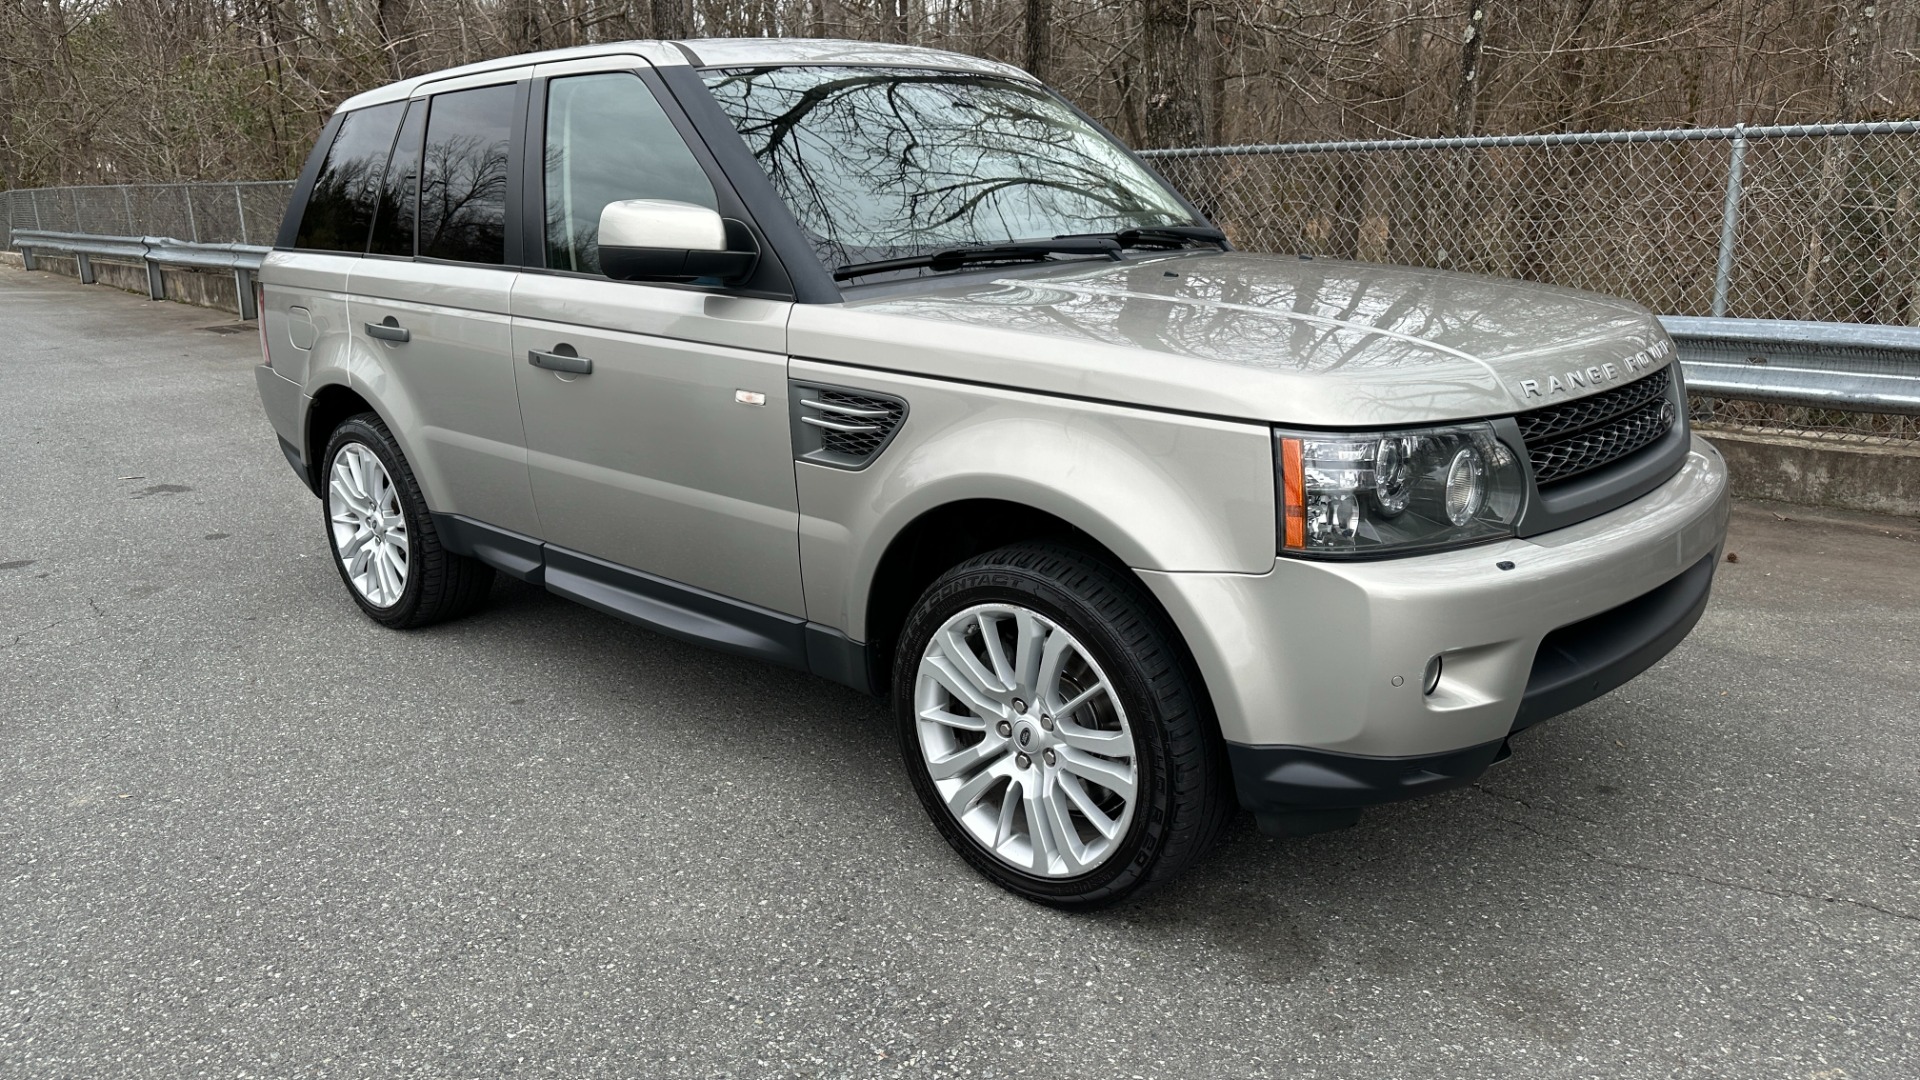 Used 2011 Land Rover Range Rover Sport HSE LUX / LEATHER / WOOD TRIM / LUXURY INTERIOR PKG / DIGITAL AND SAT RADIO for sale Sold at Formula Imports in Charlotte NC 28227 5